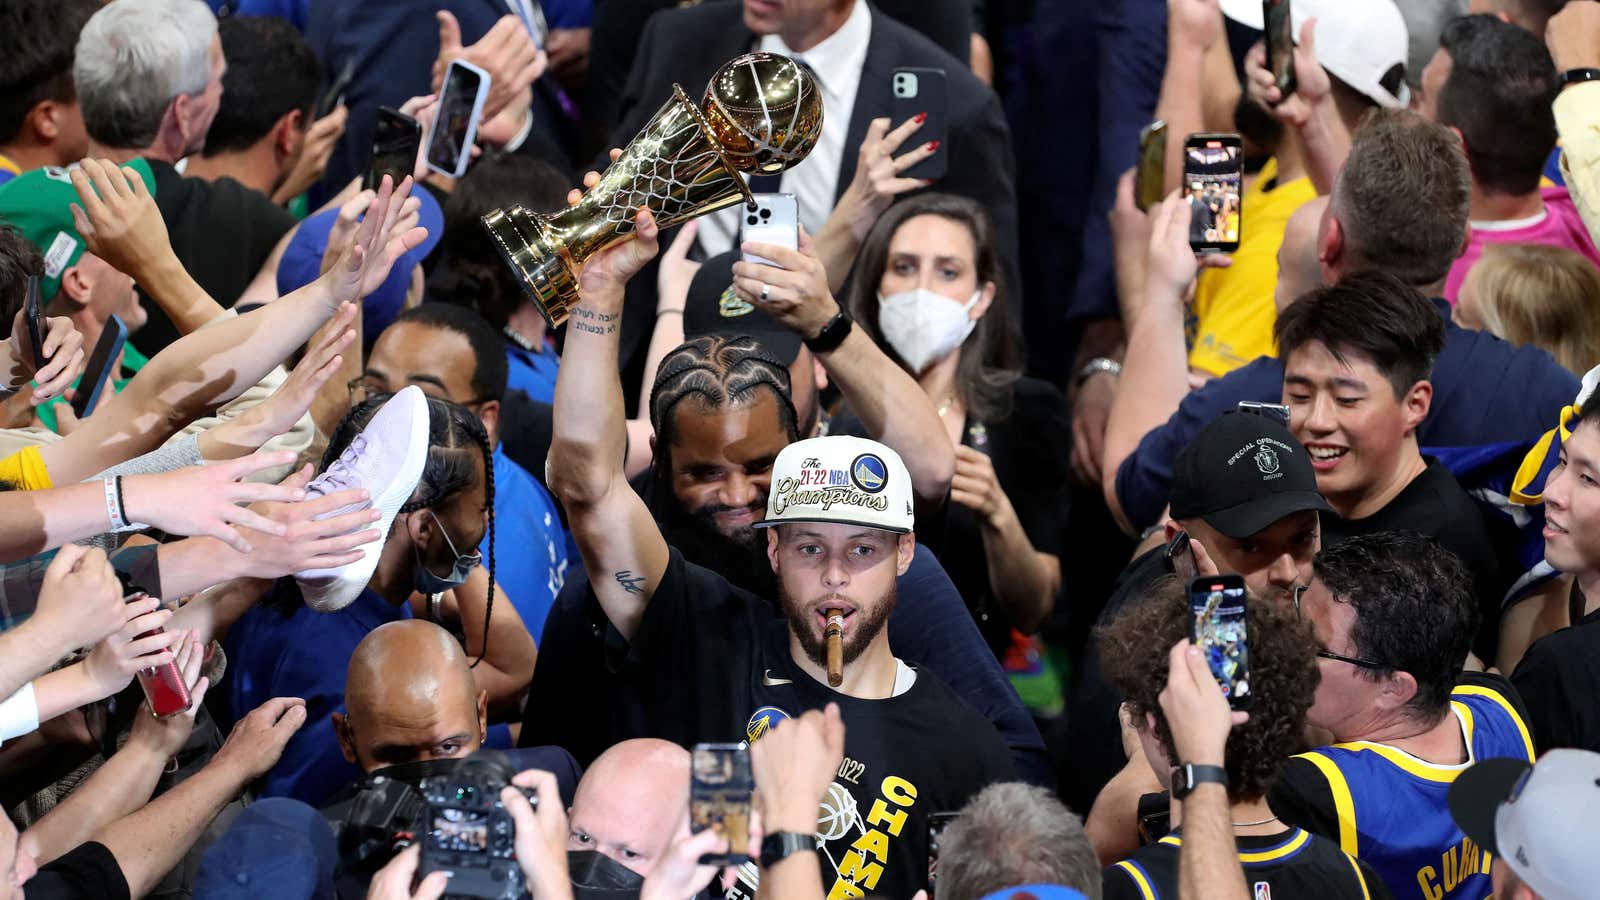 Warriors guard Steph Curry surrounded by fans as he holds up his Most Valuable Player trophy at the NBA Finals.